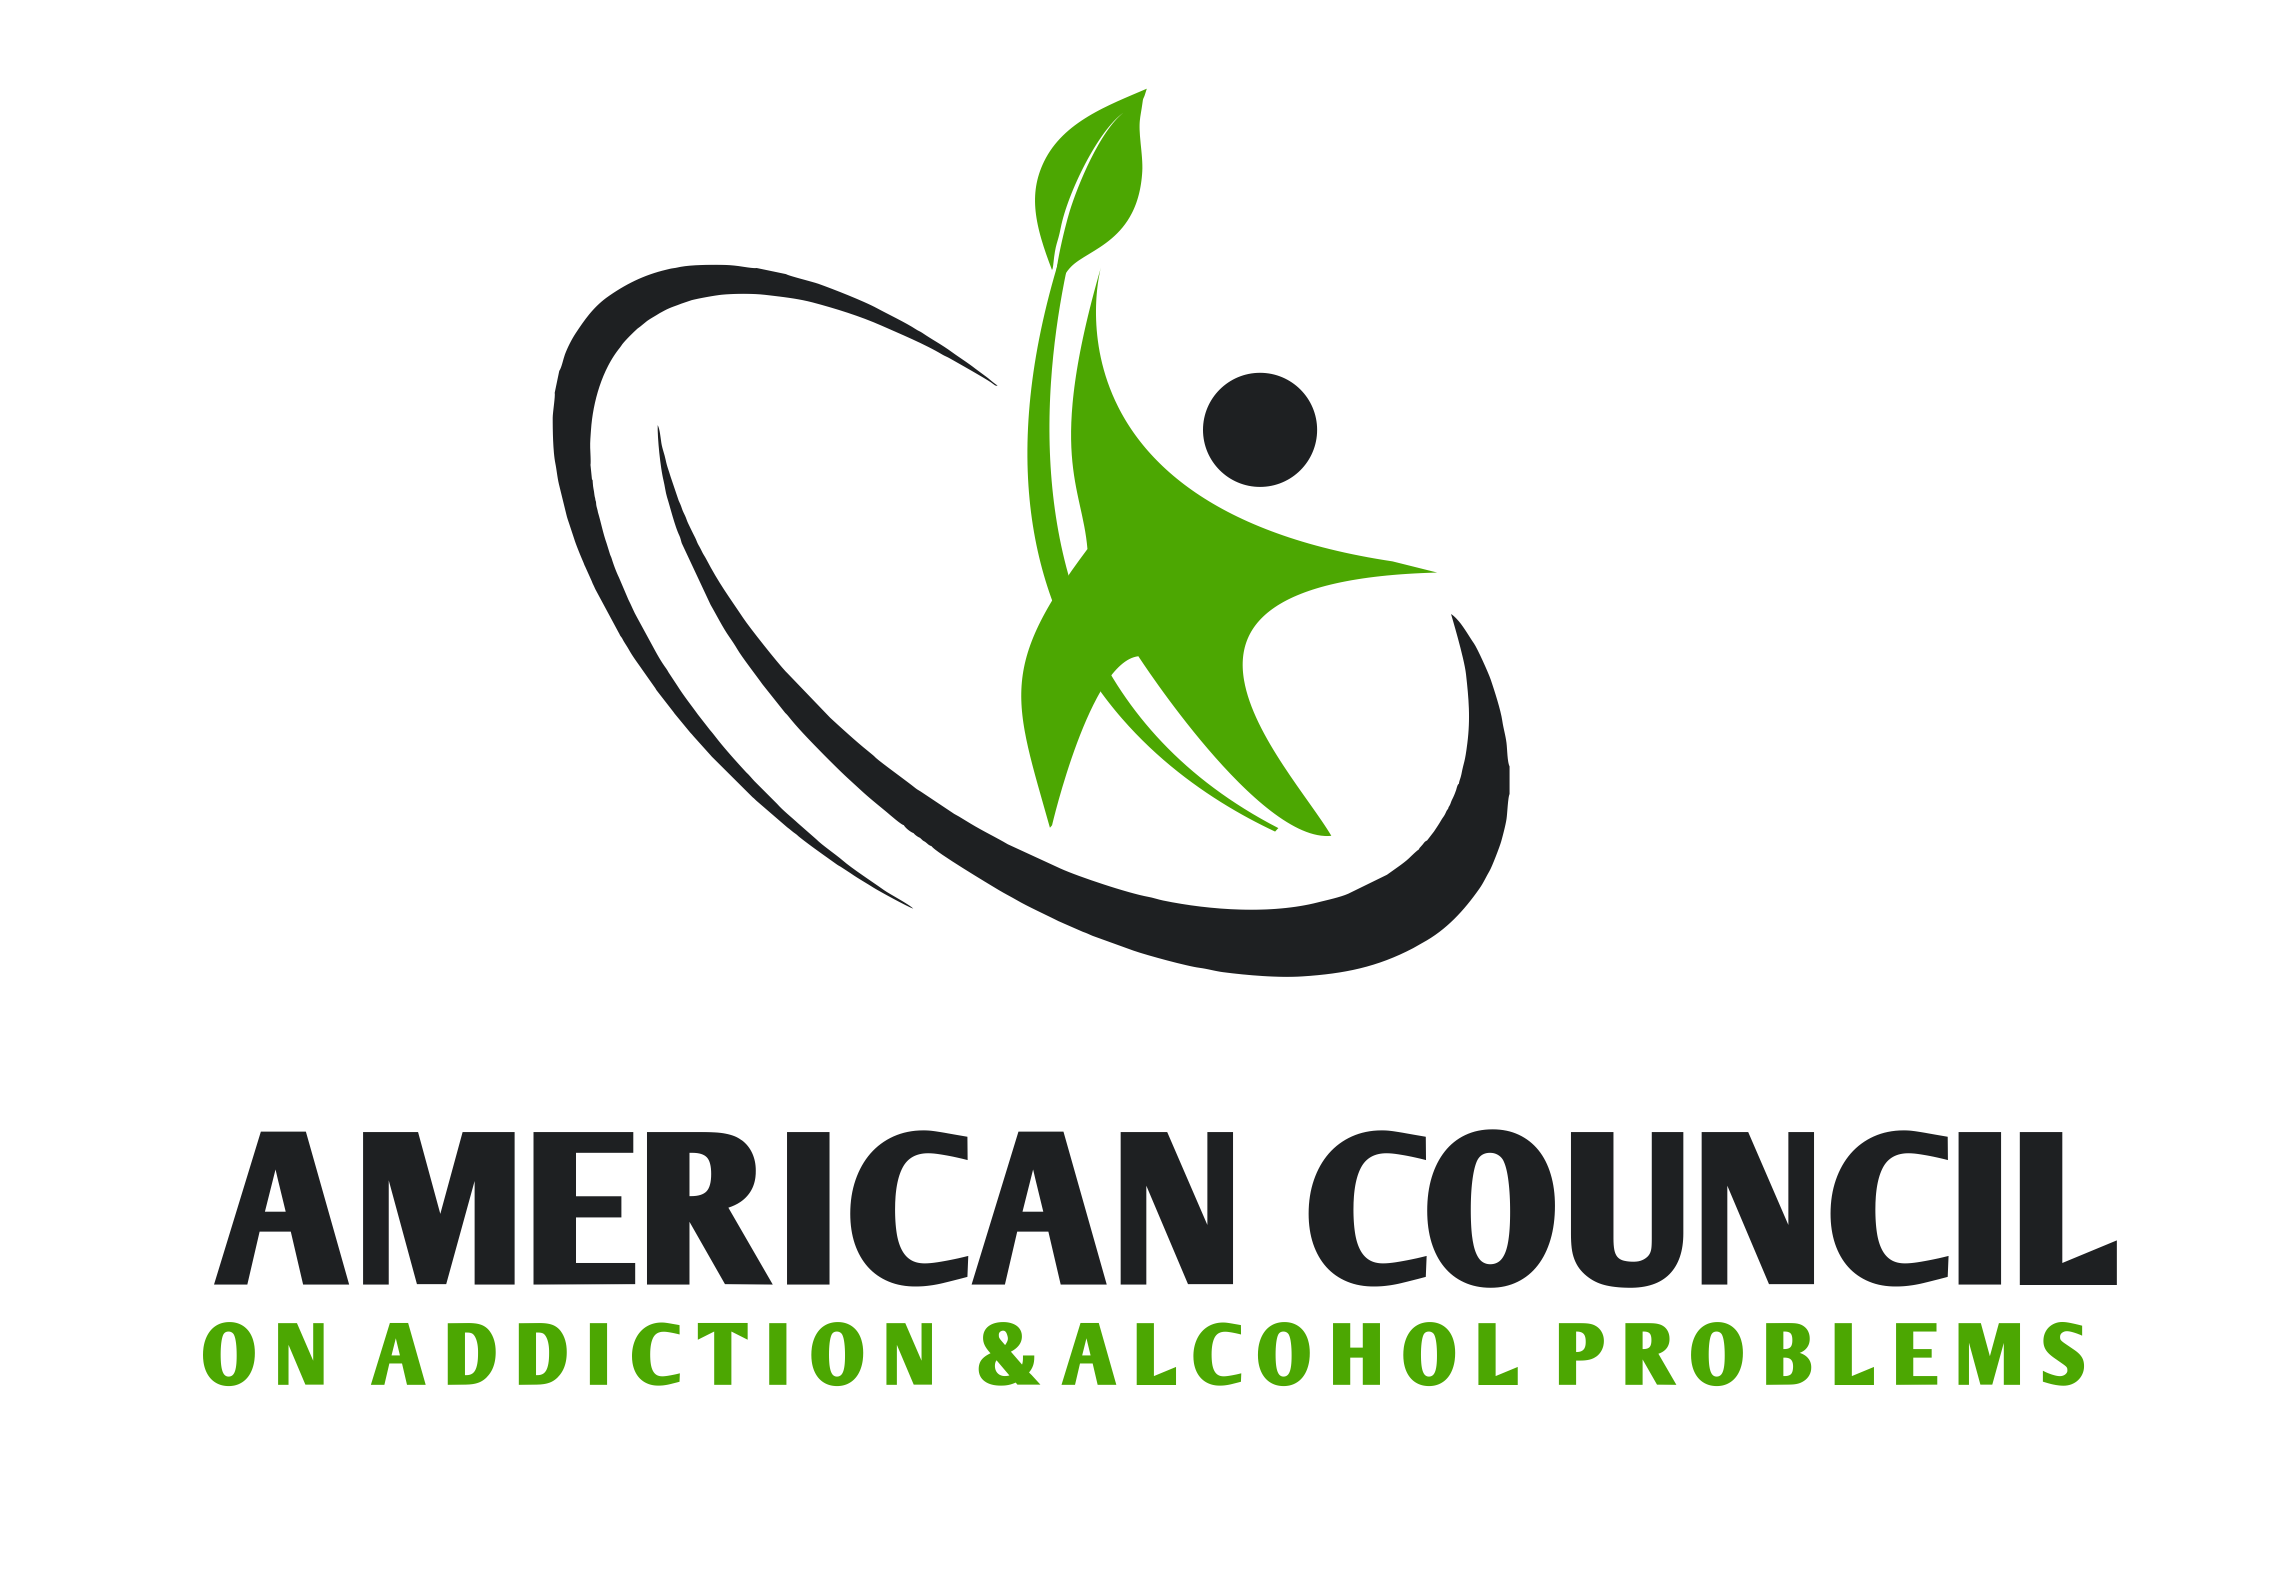 American Council on Addiction and Alcohol Problems